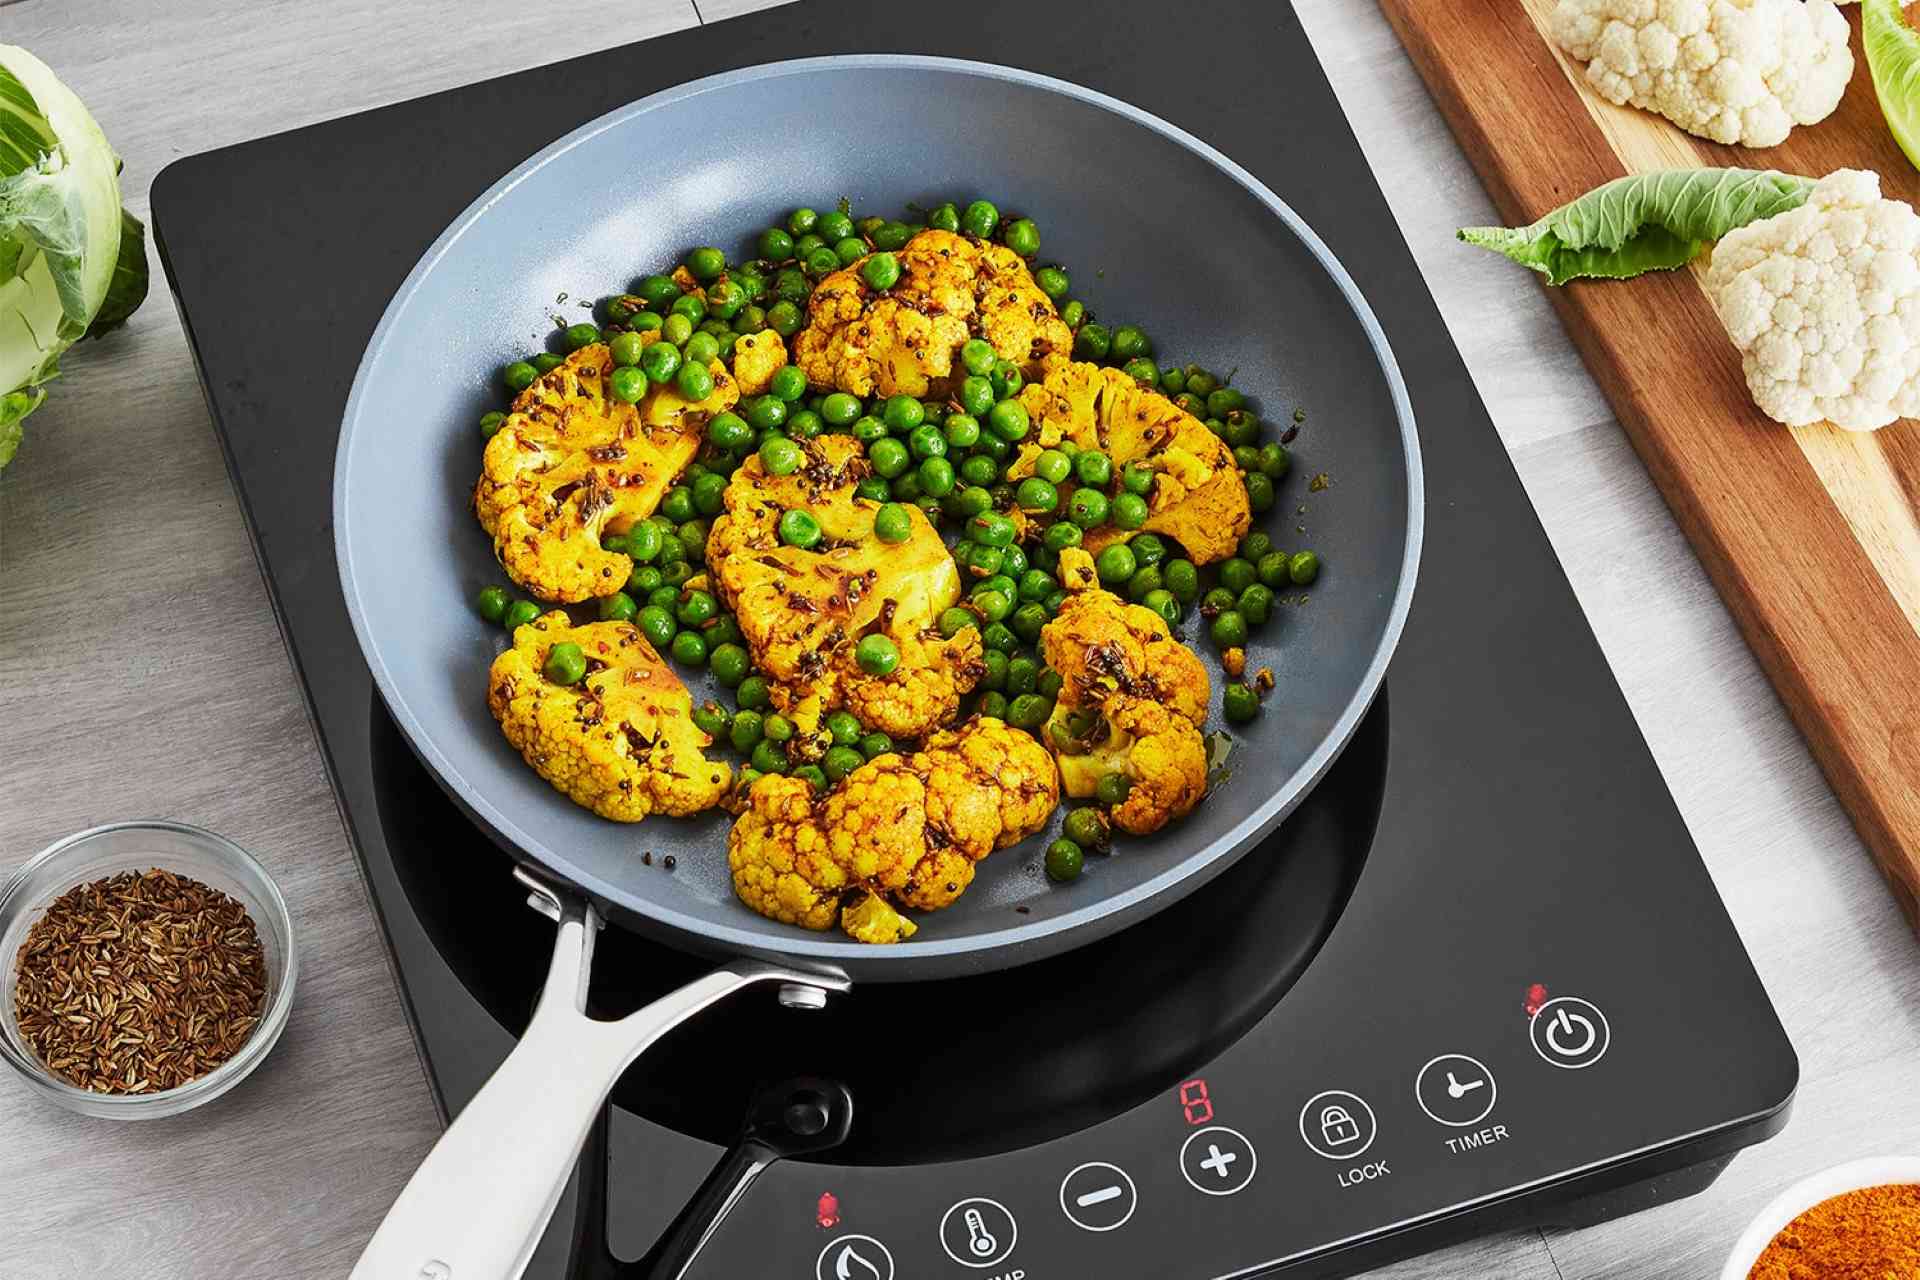 What Is An Induction Stovetop?